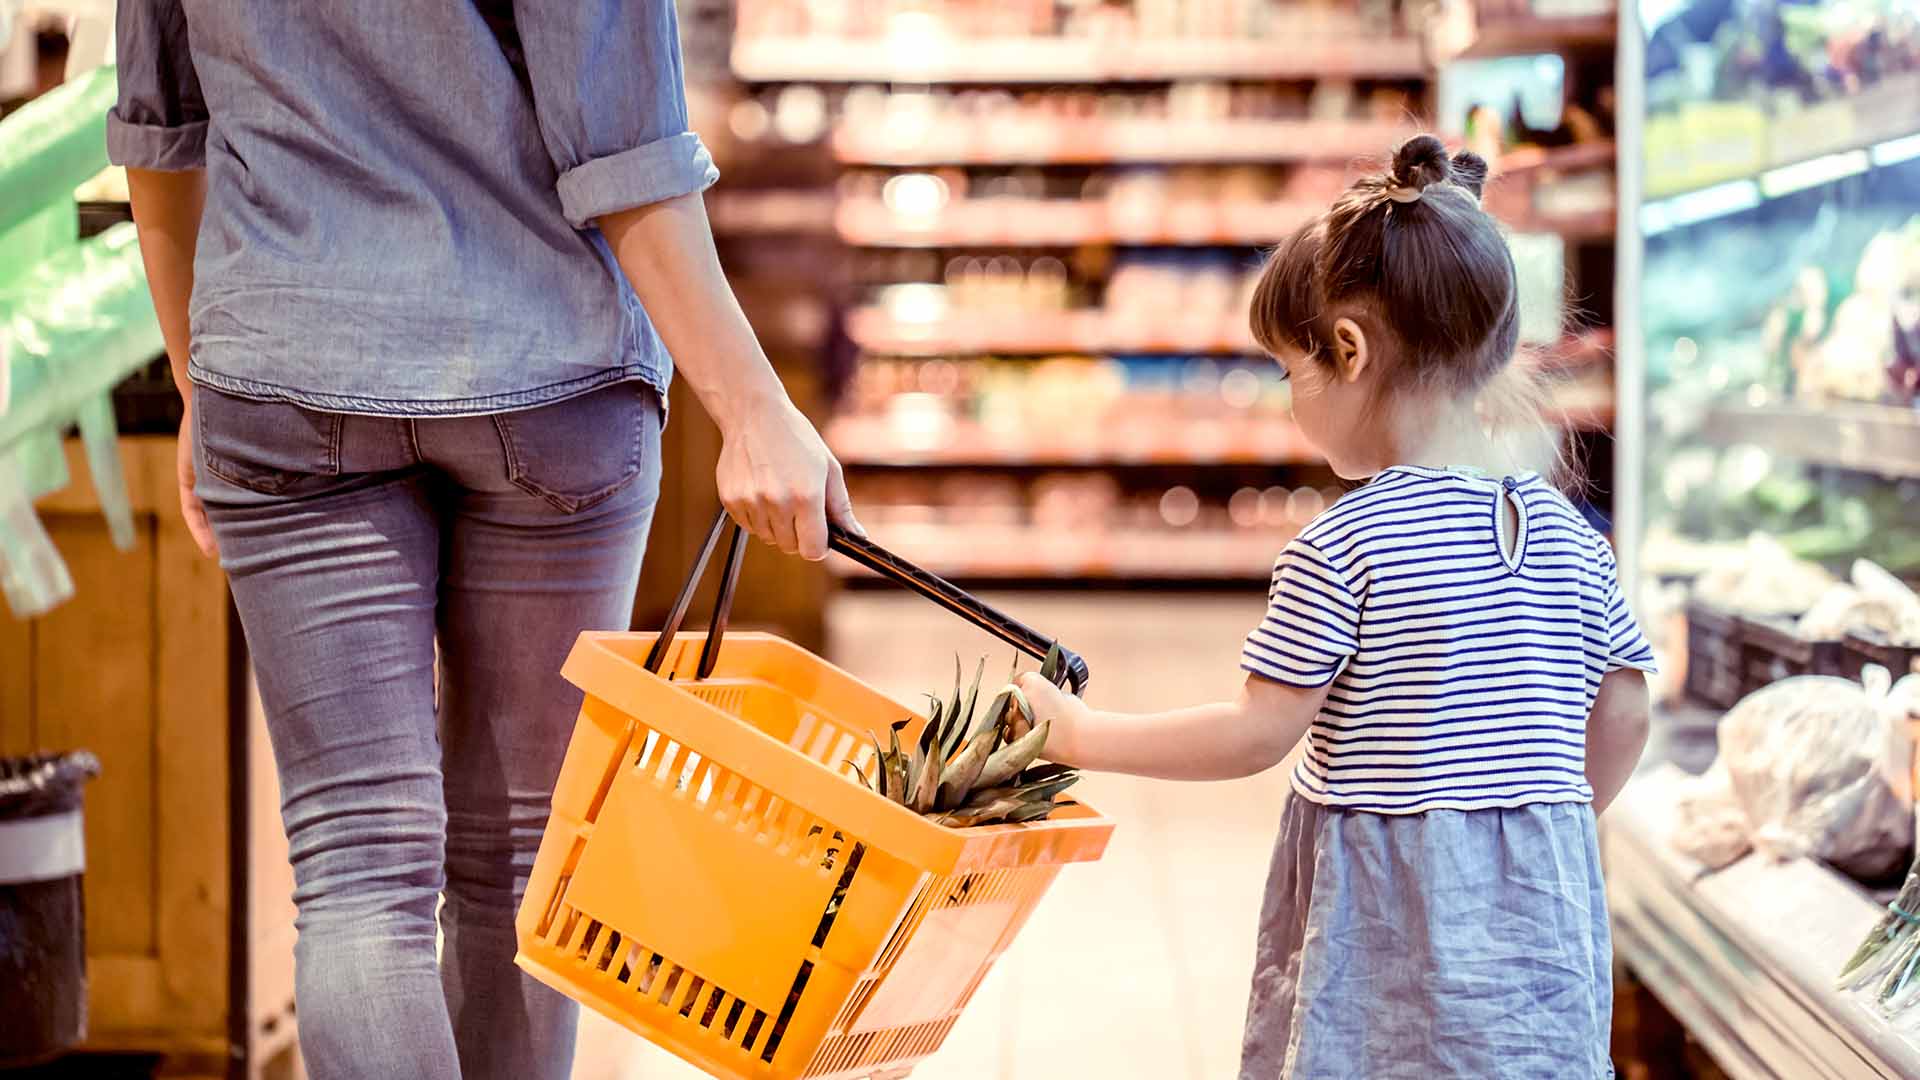 Young girl shopping with parent